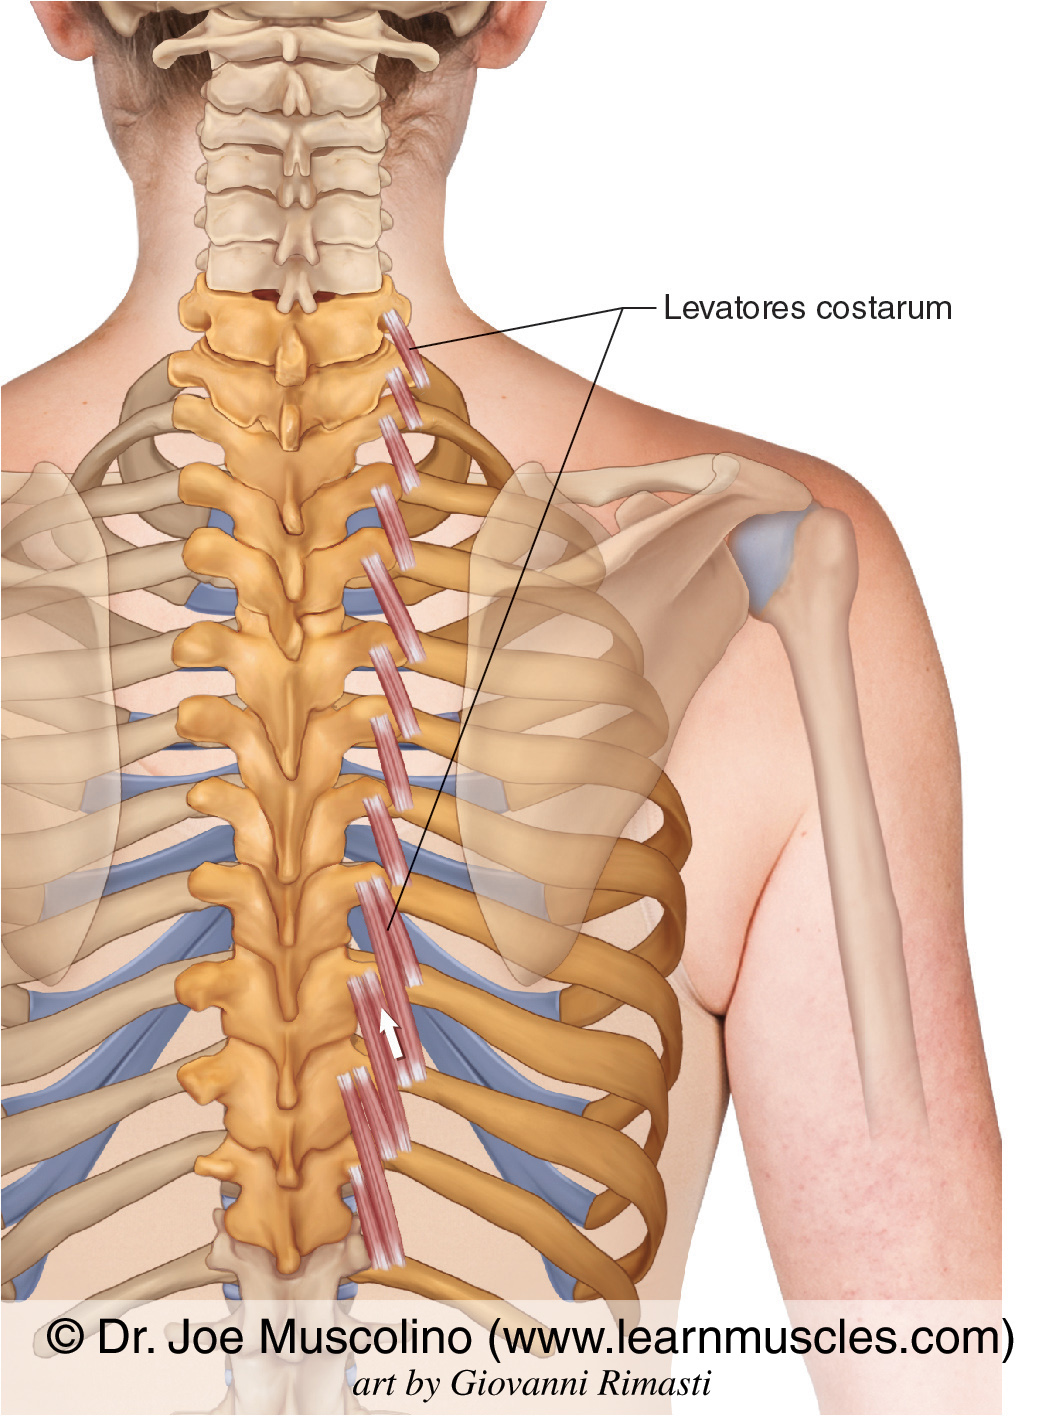 Levatores Costarum Learn Muscles